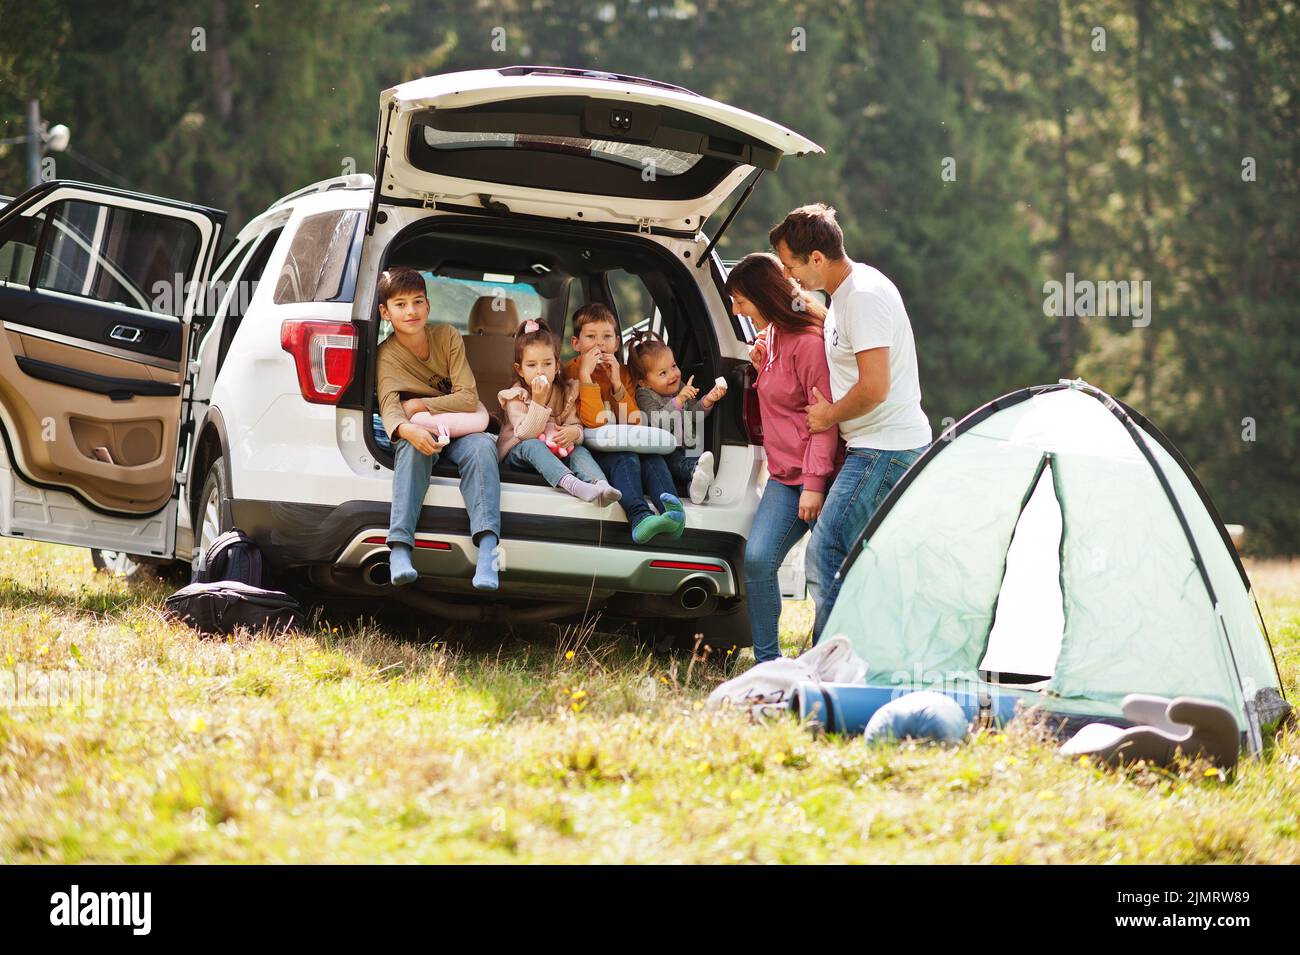 Large family of four kids. Children in trunk. Traveling by car in the mountains, atmosphere concept. American spirit. Stock Photo